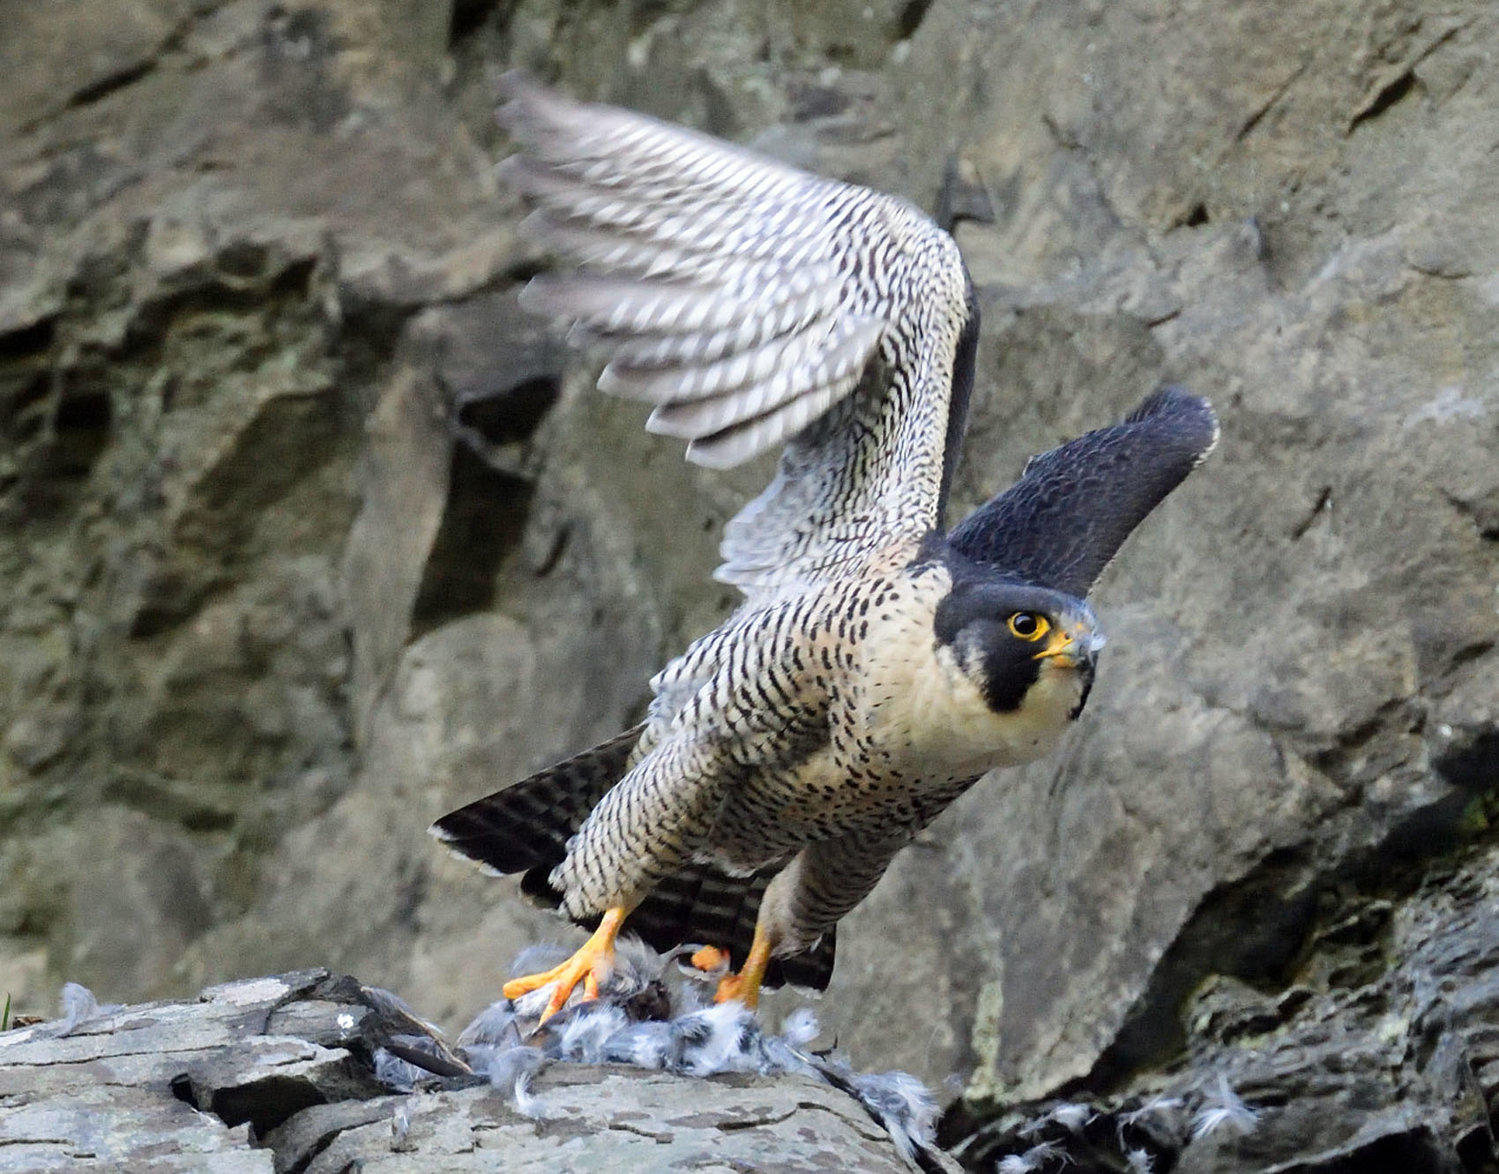 This adult peregrine launched itself into the air after finishing a meal, a bird it caught in mid-air. Peregrines feed almost exclusively on birds caught in this manner. This was an active nesting area; as the young grow larger, they require more and more food and that keeps both adults busy foraging for the eyases (falcon young). Among the species list of birds brought to this nest scrap was a pigeon and several blue jays.